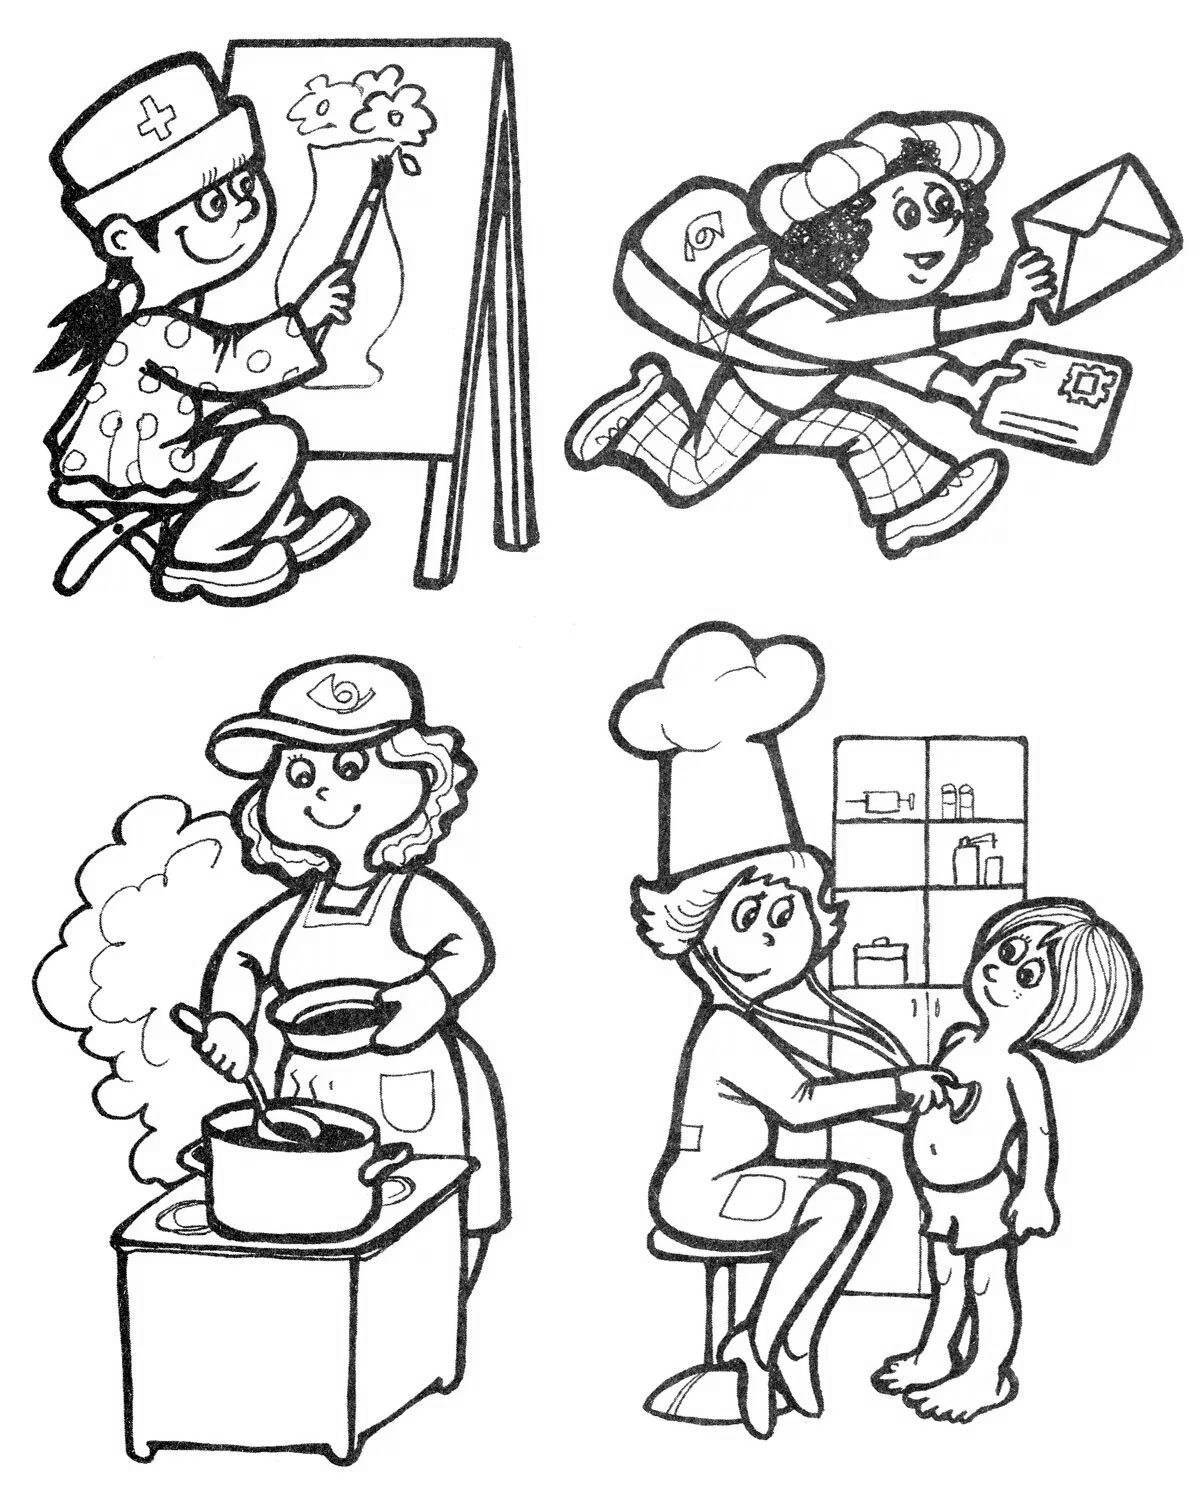 Fun job coloring pages for young learners